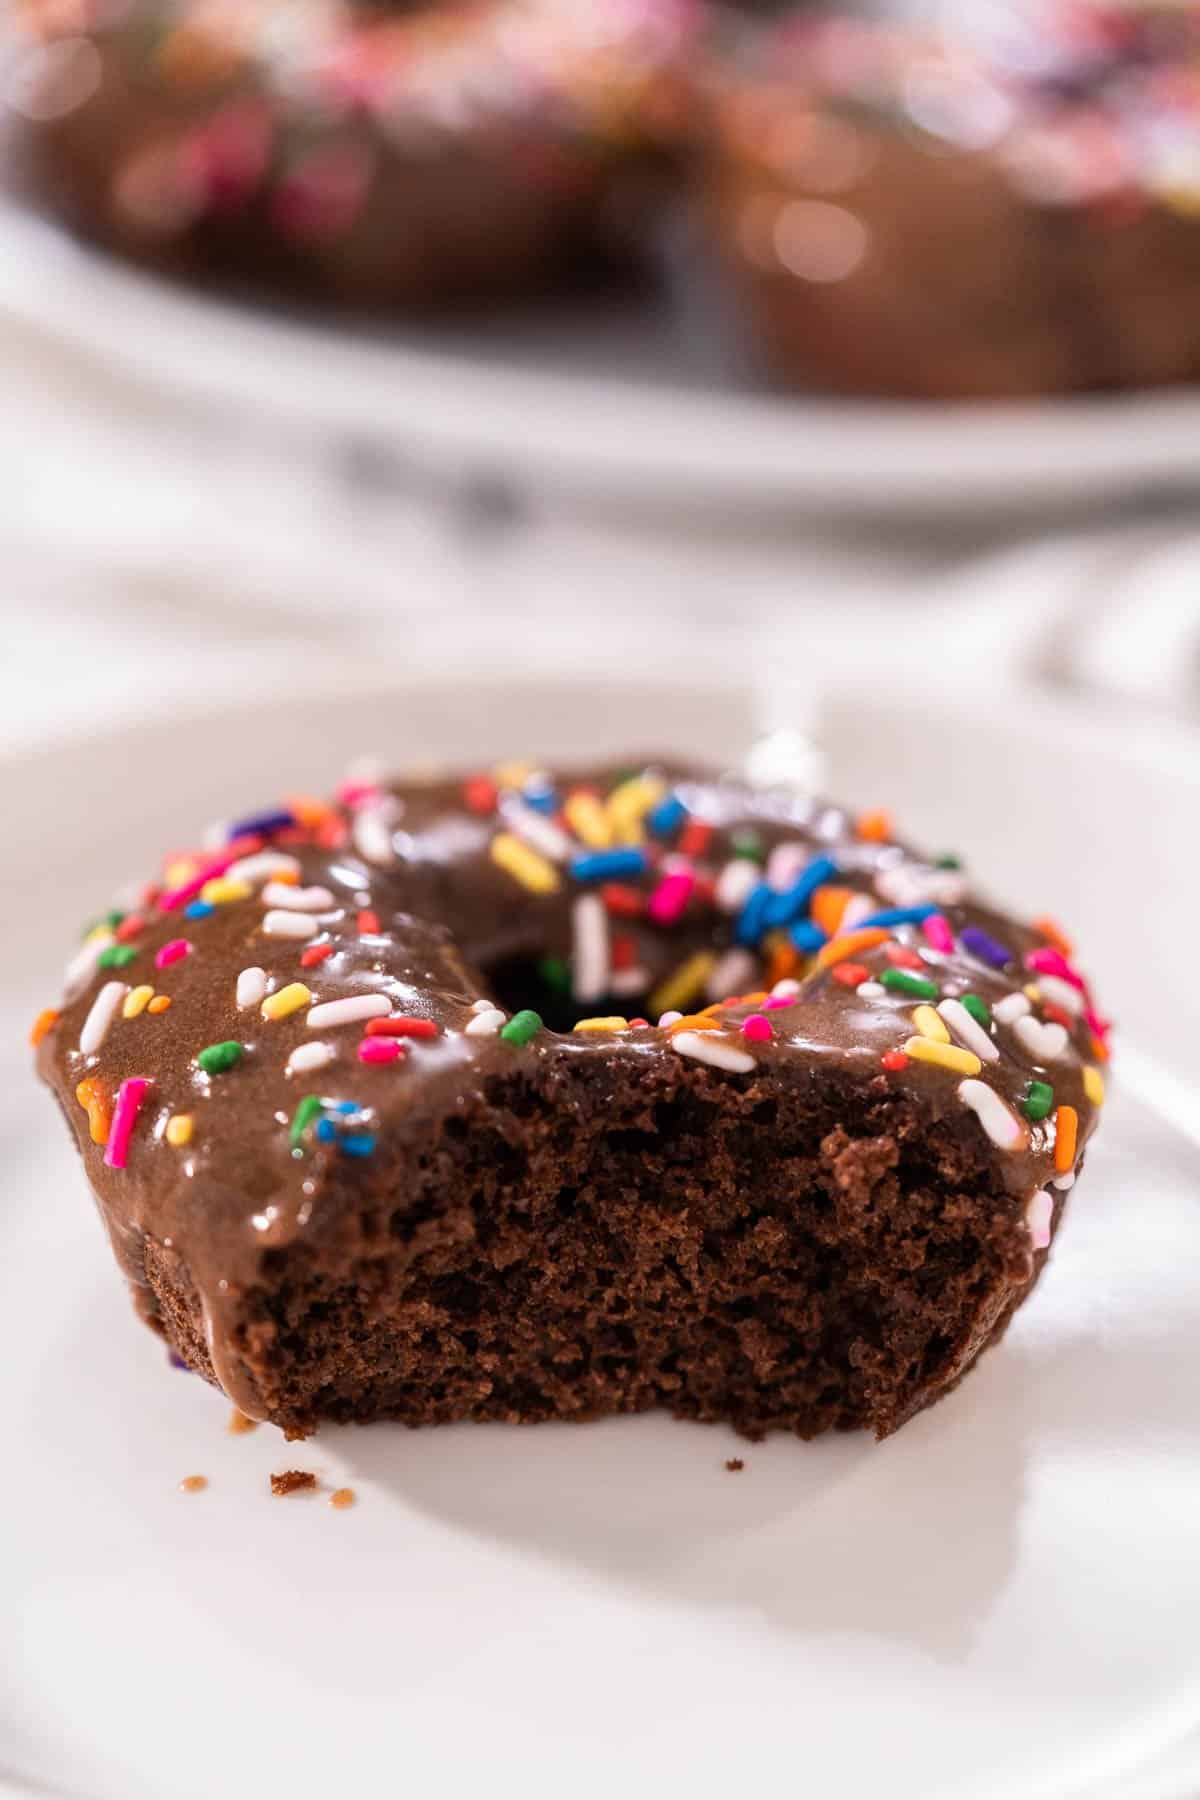 One chocolate protein donut covered in rainbow sprinkles with a bite taken out of it on a white plate.